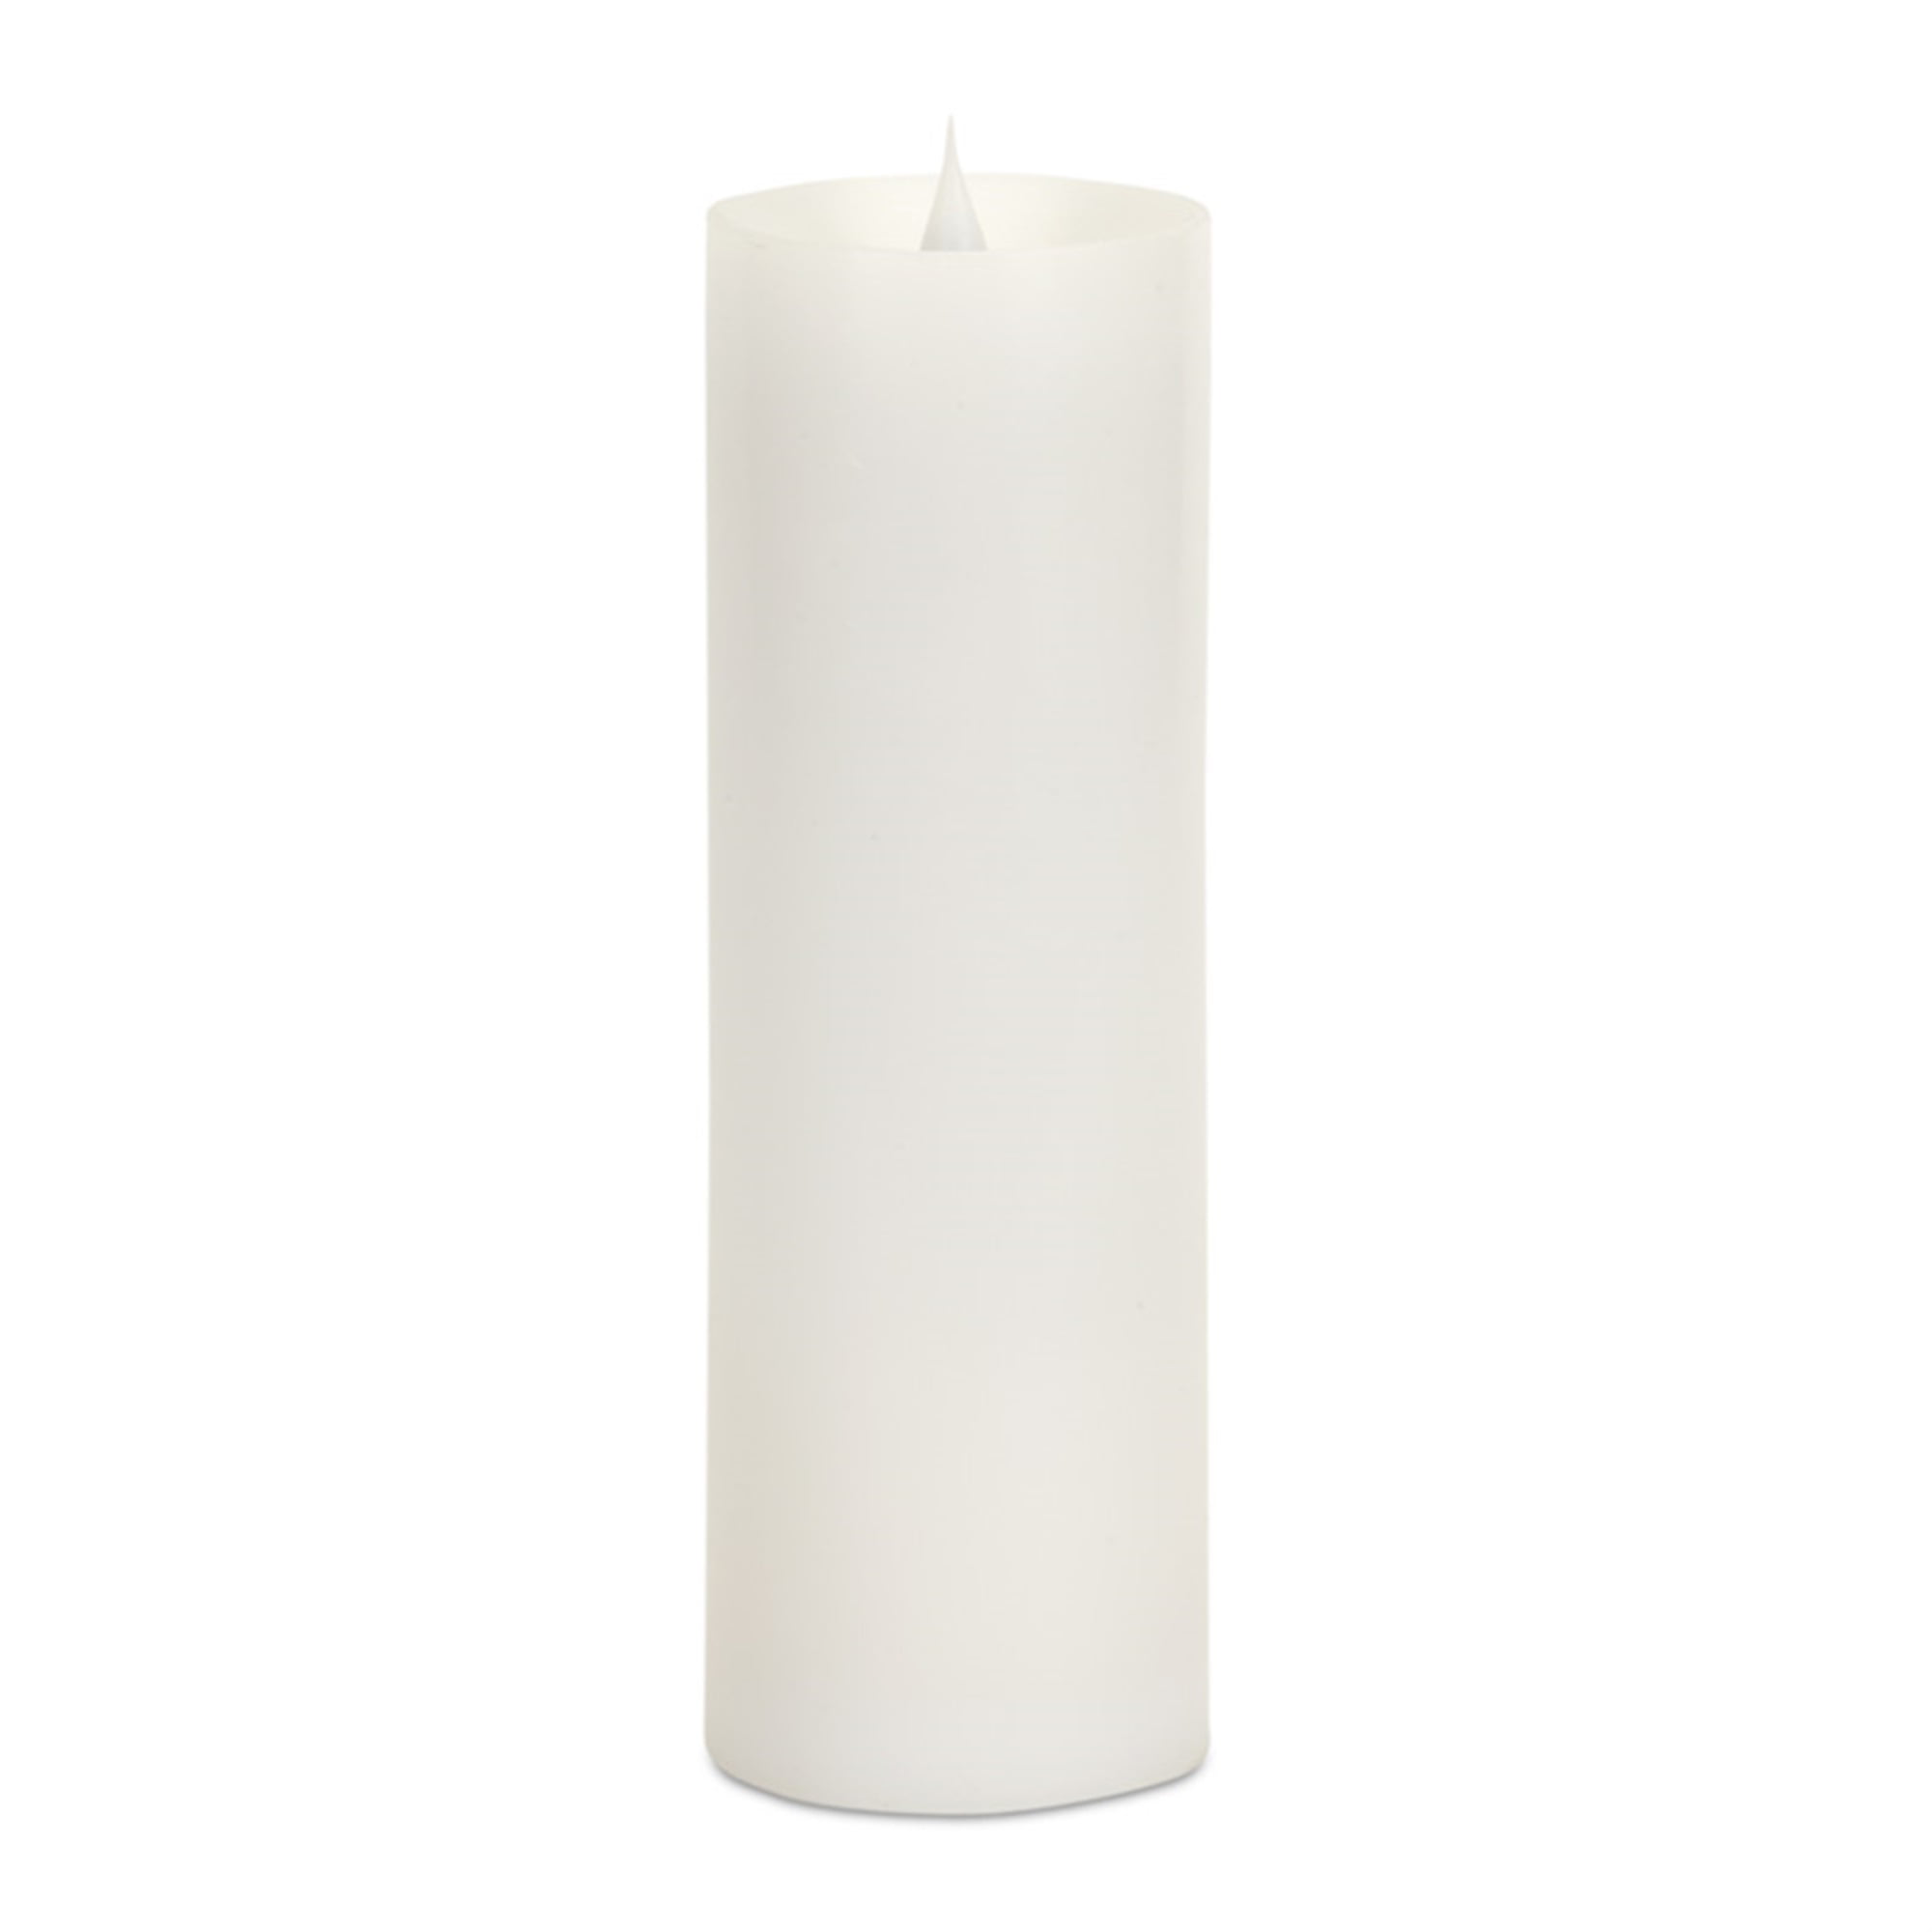 Simplux LED Pillar Candle w/Moving Flame (Set of 2) 3"D x 9"H